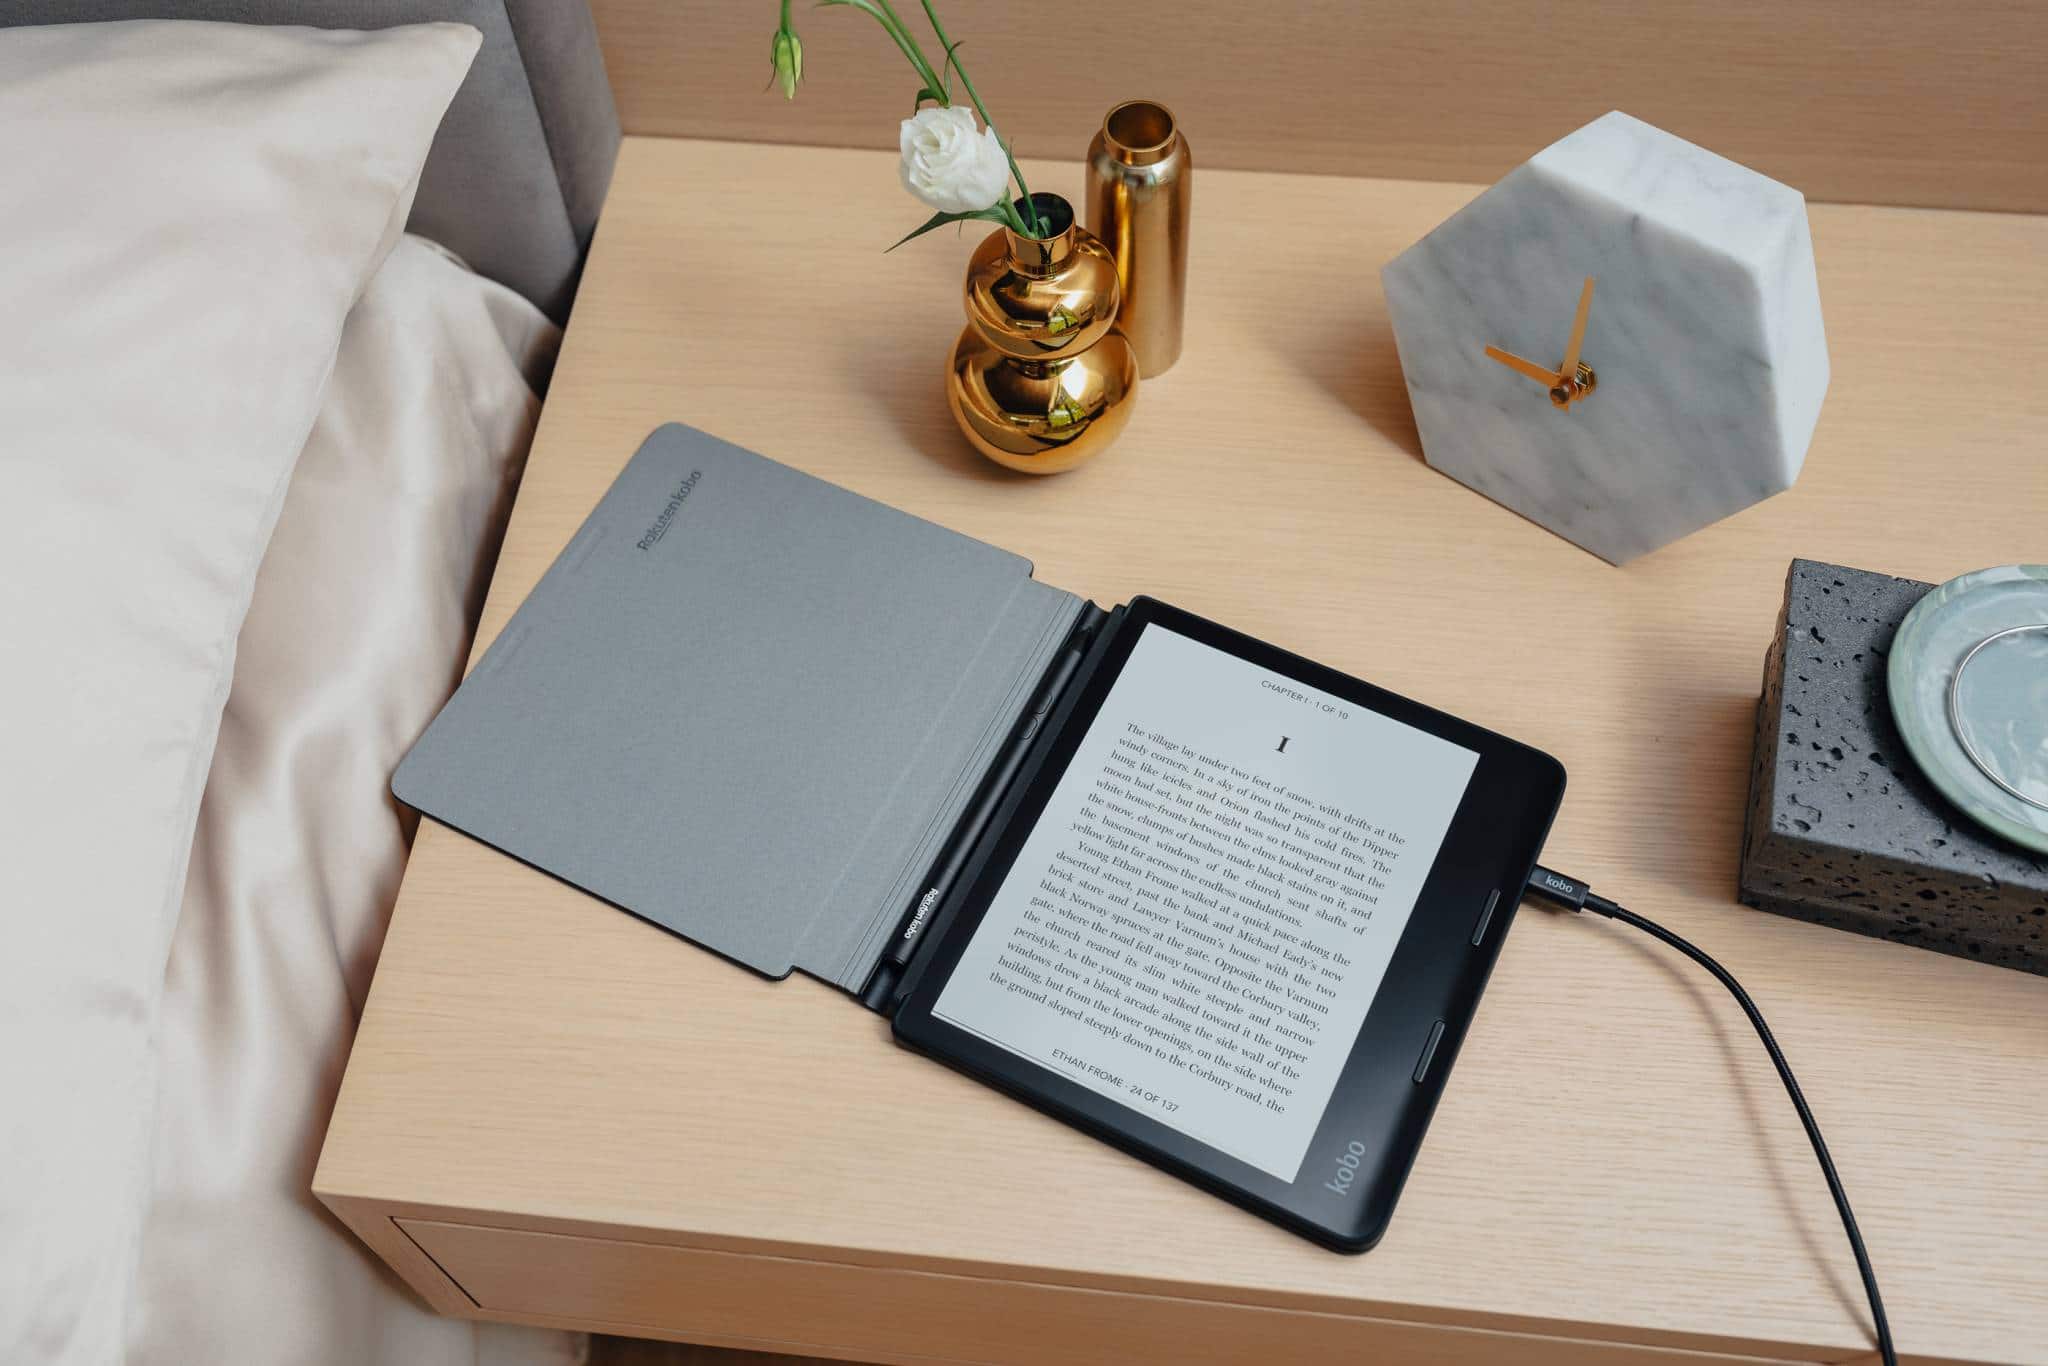 Hands on Review of the Kobo Sage e-reader - Good e-Reader